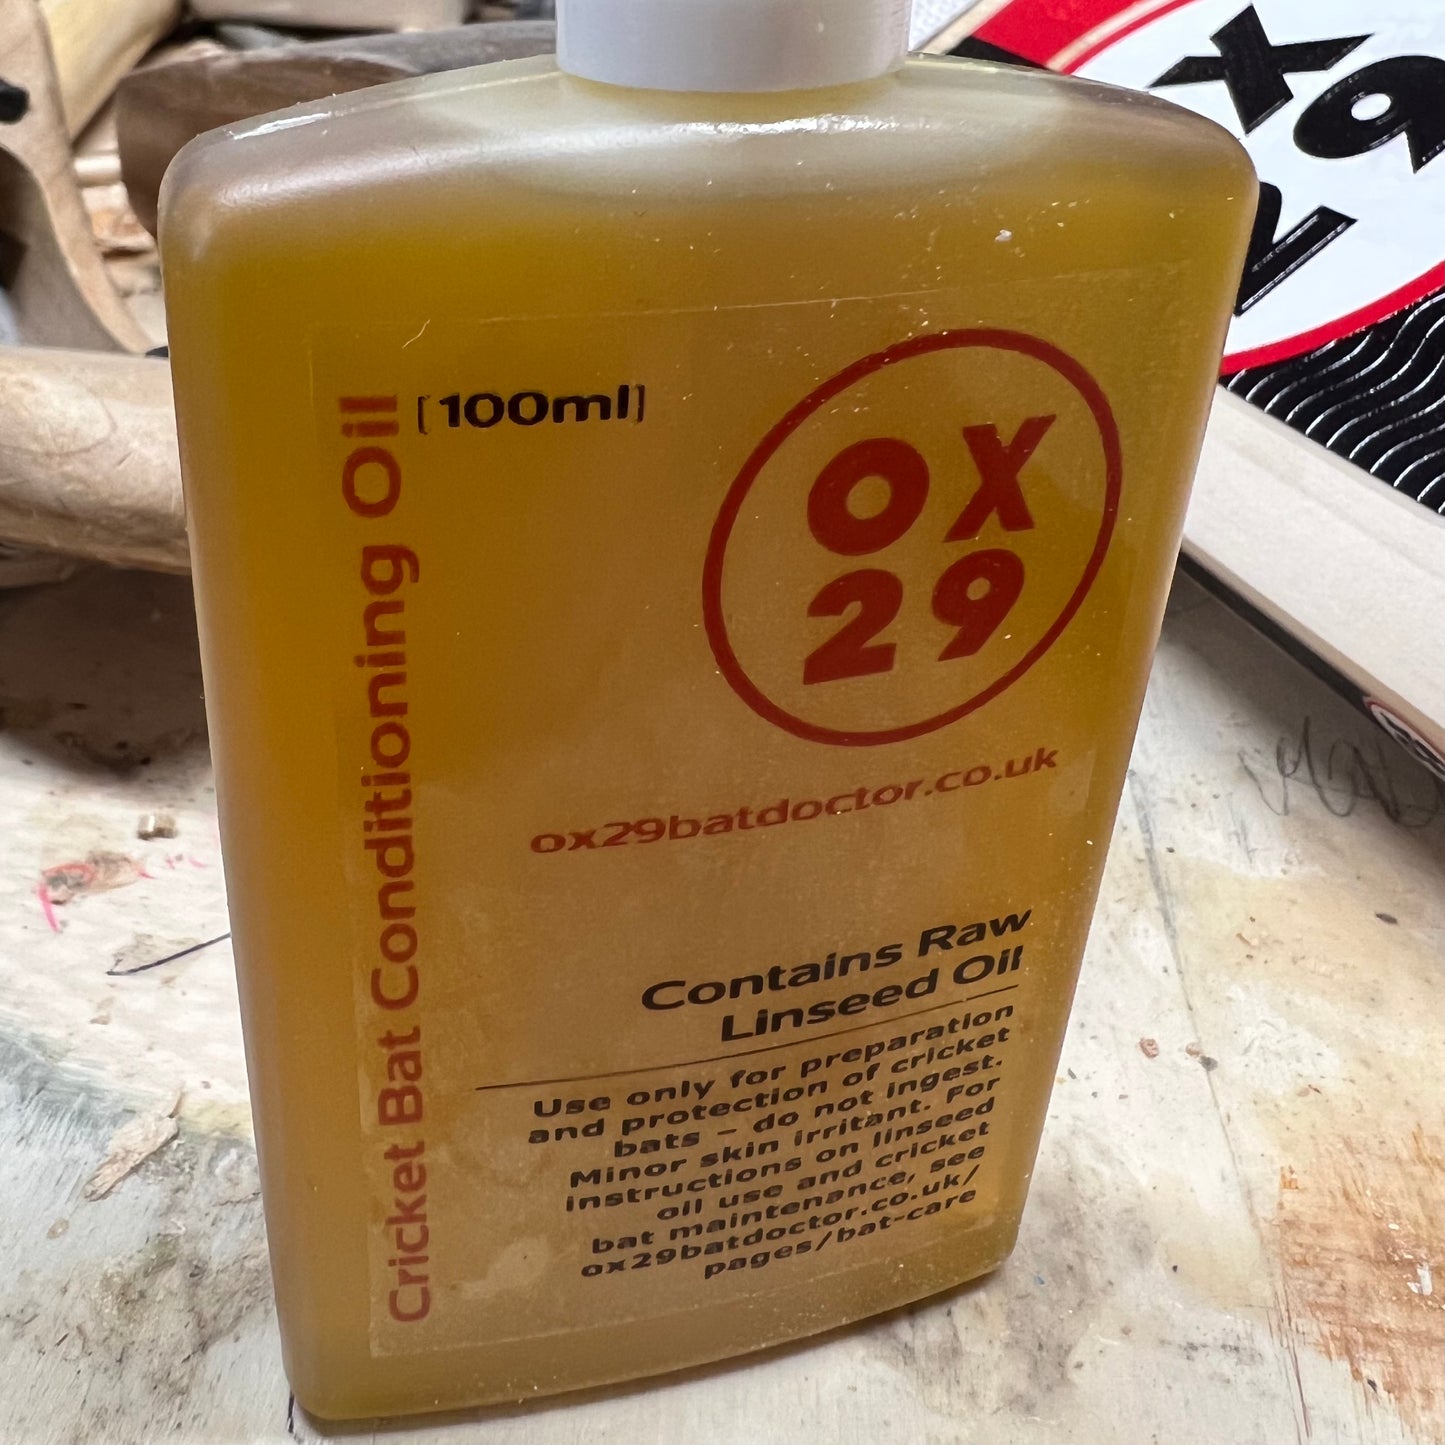 OX29 Bat Doctor Cricket Bat Conditioning Oil, Raw Linseed Oil, 100ml